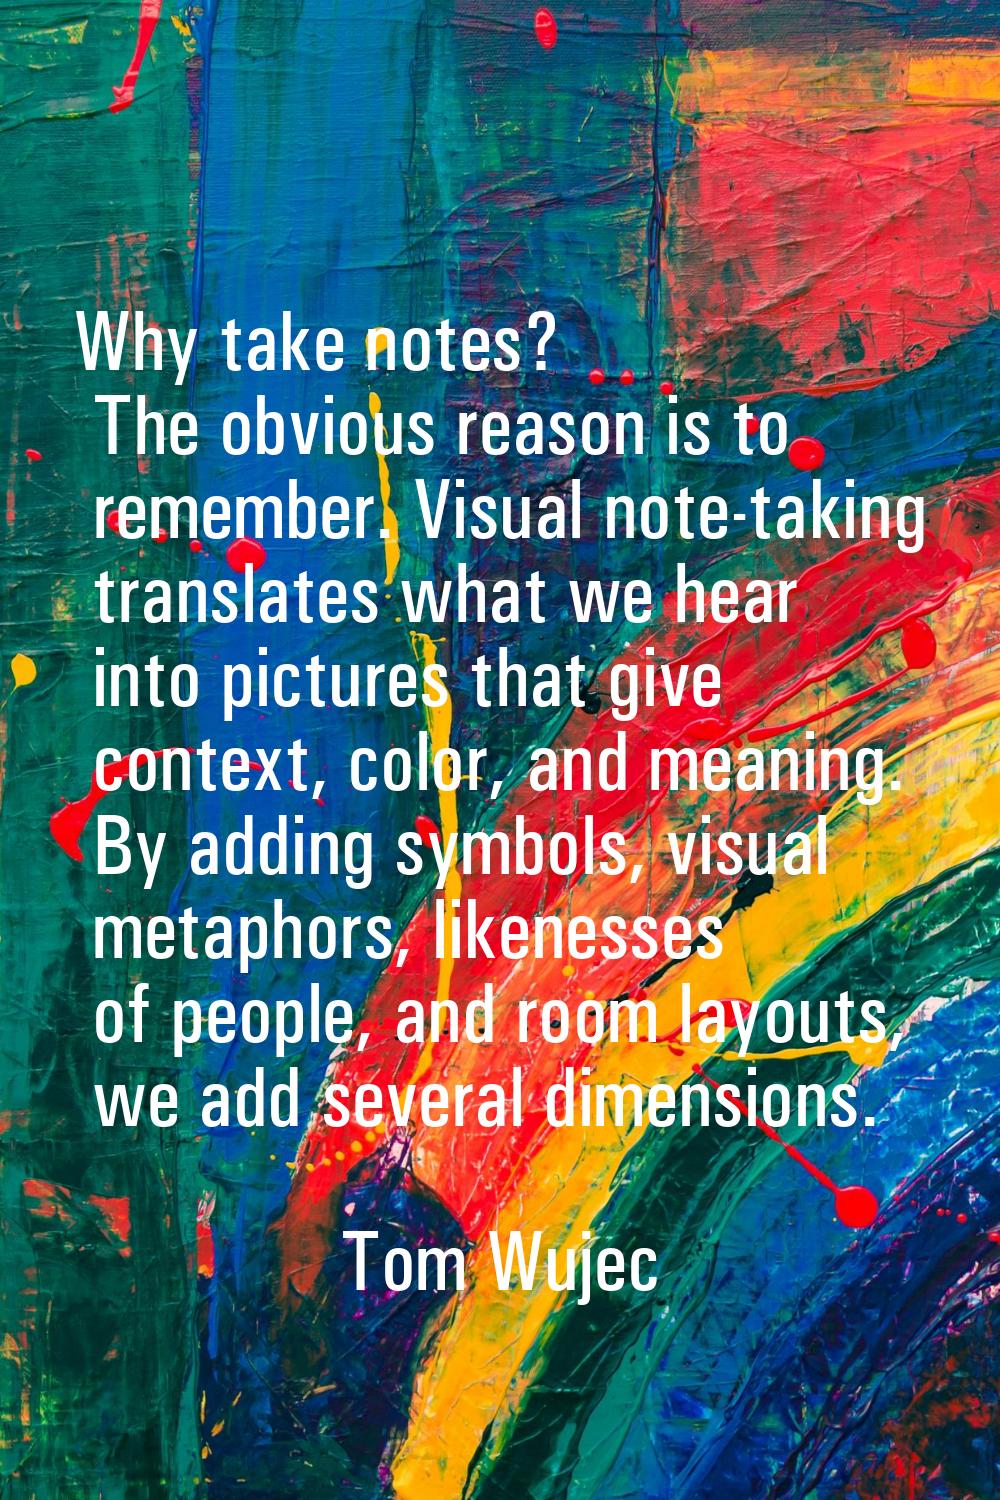 Why take notes? The obvious reason is to remember. Visual note-taking translates what we hear into 